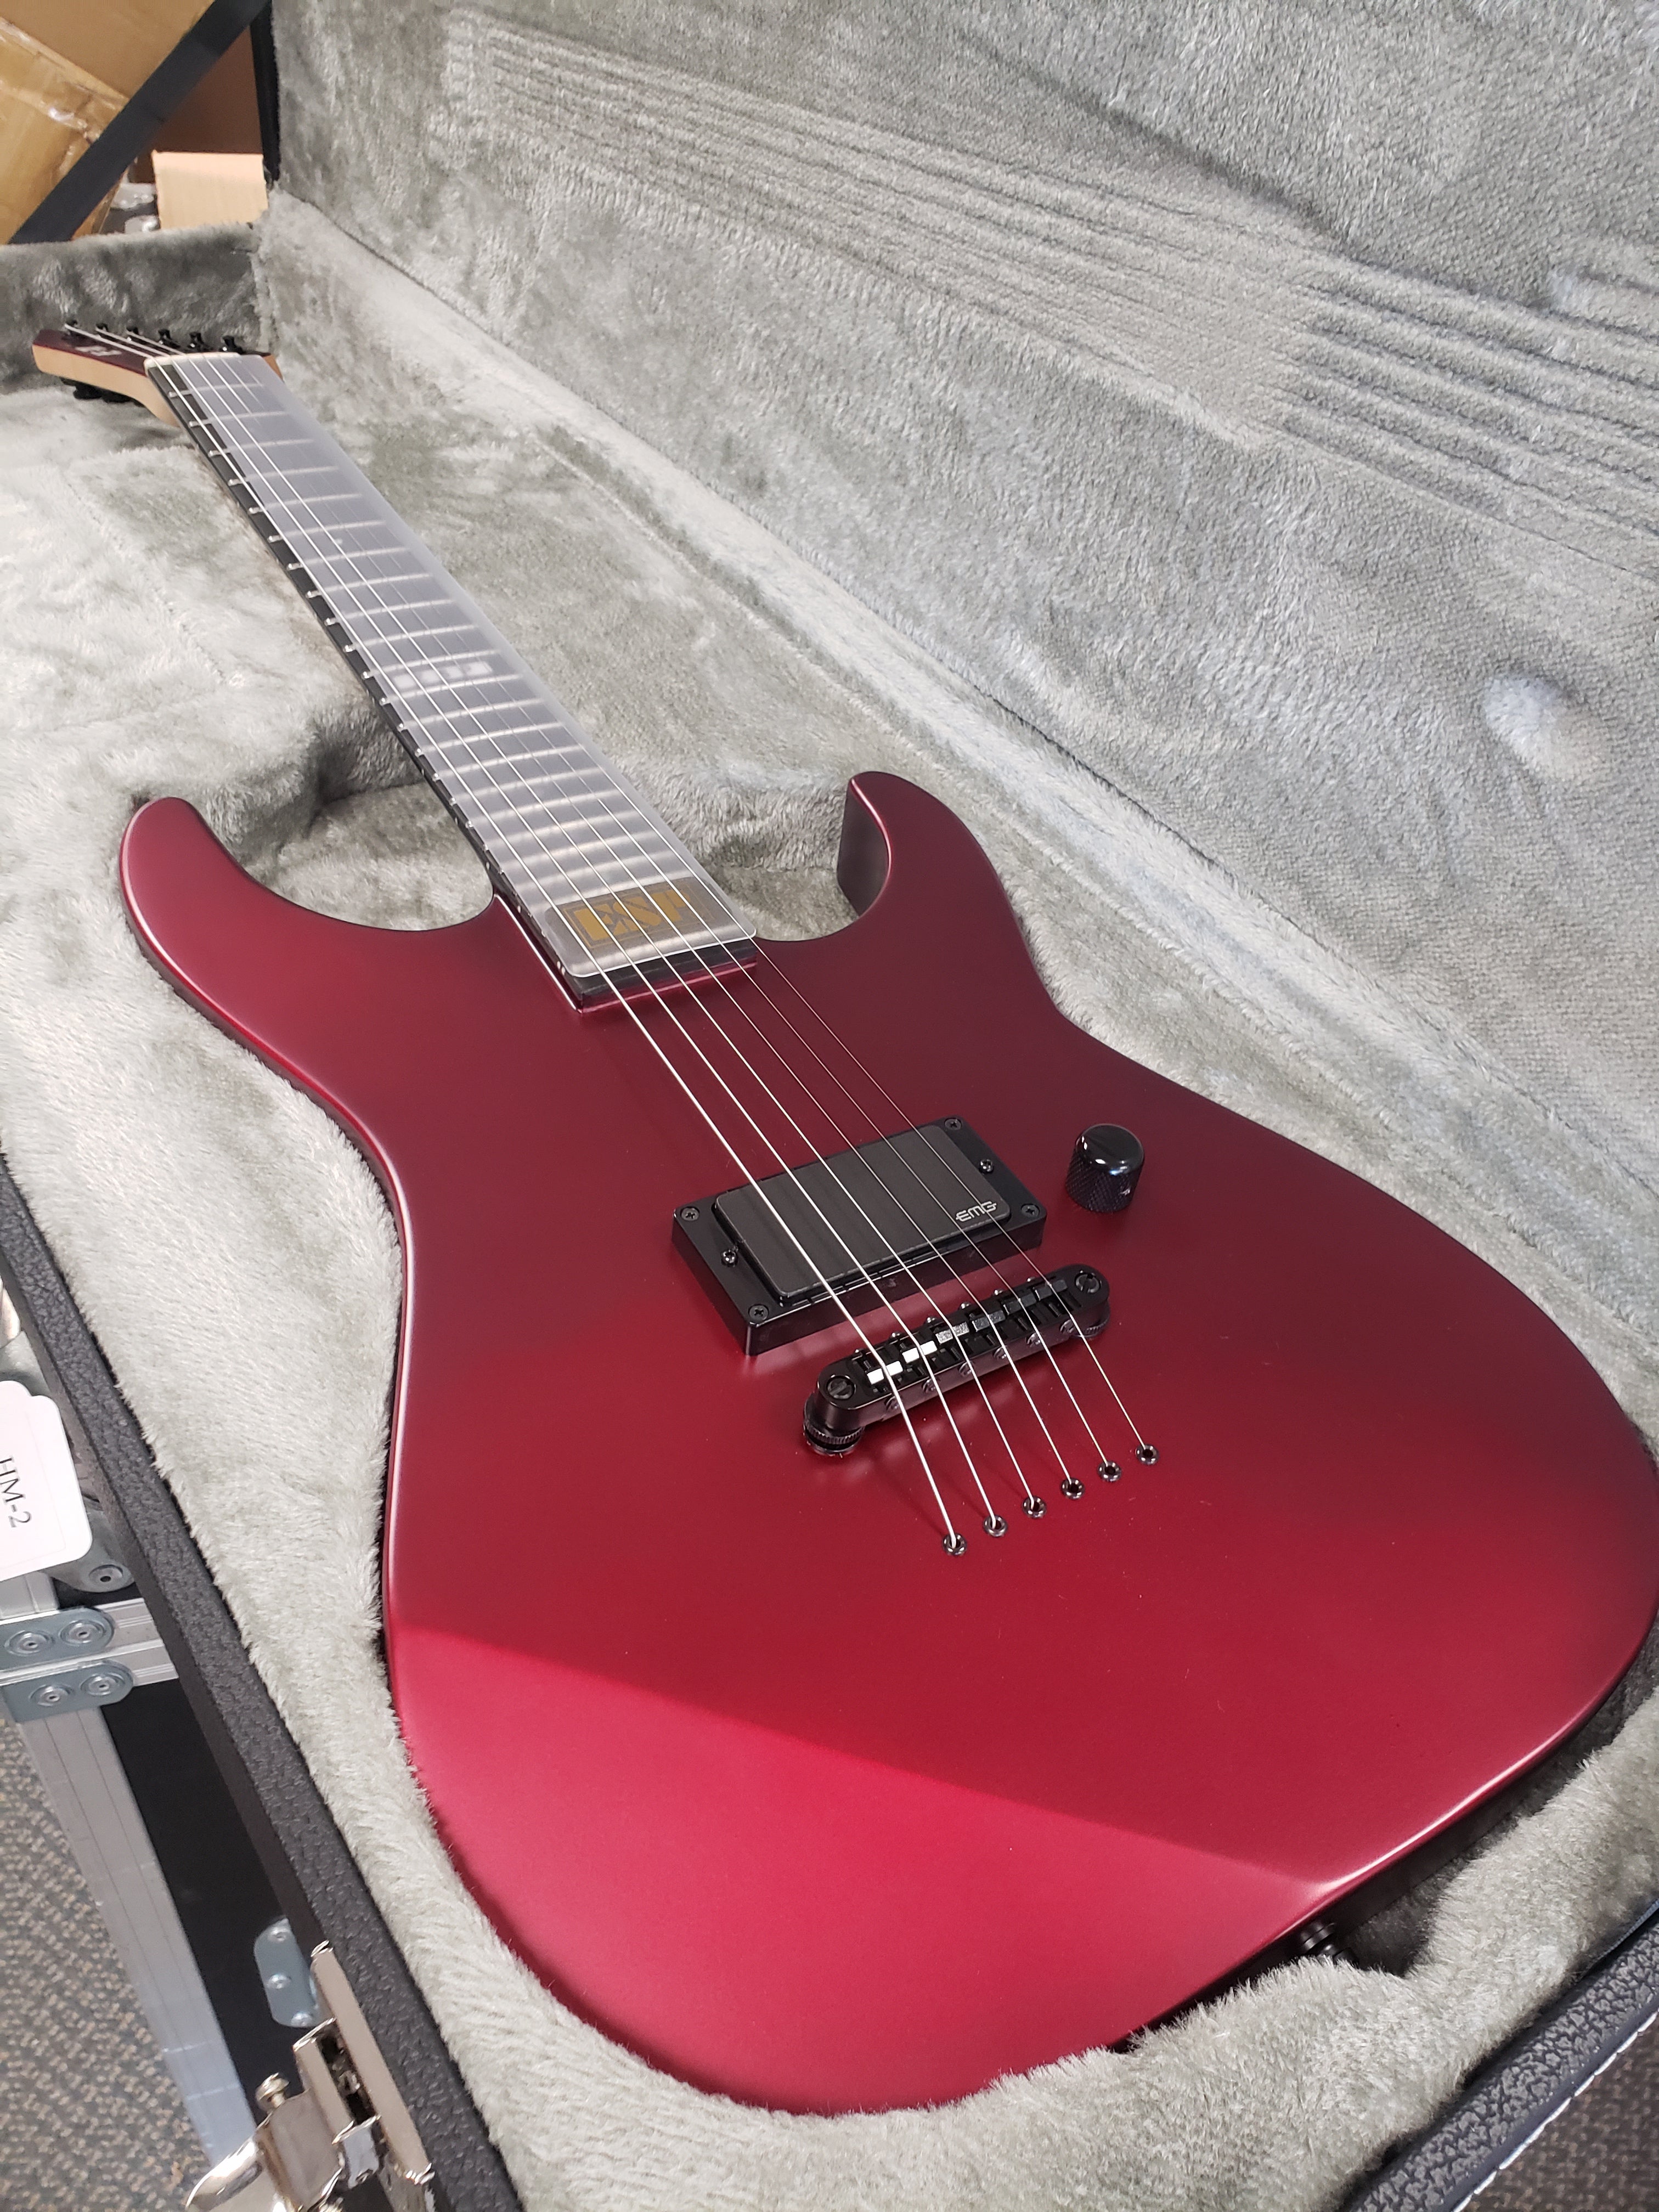 HANDPICKED ESP E-II M-I THRU NT MADE IN JAPAN NECK THRU Deep Candy Apple Red EIIMITHRUNTDCARS SERIAL NUMBER ES2792213 - 7.4 LBS